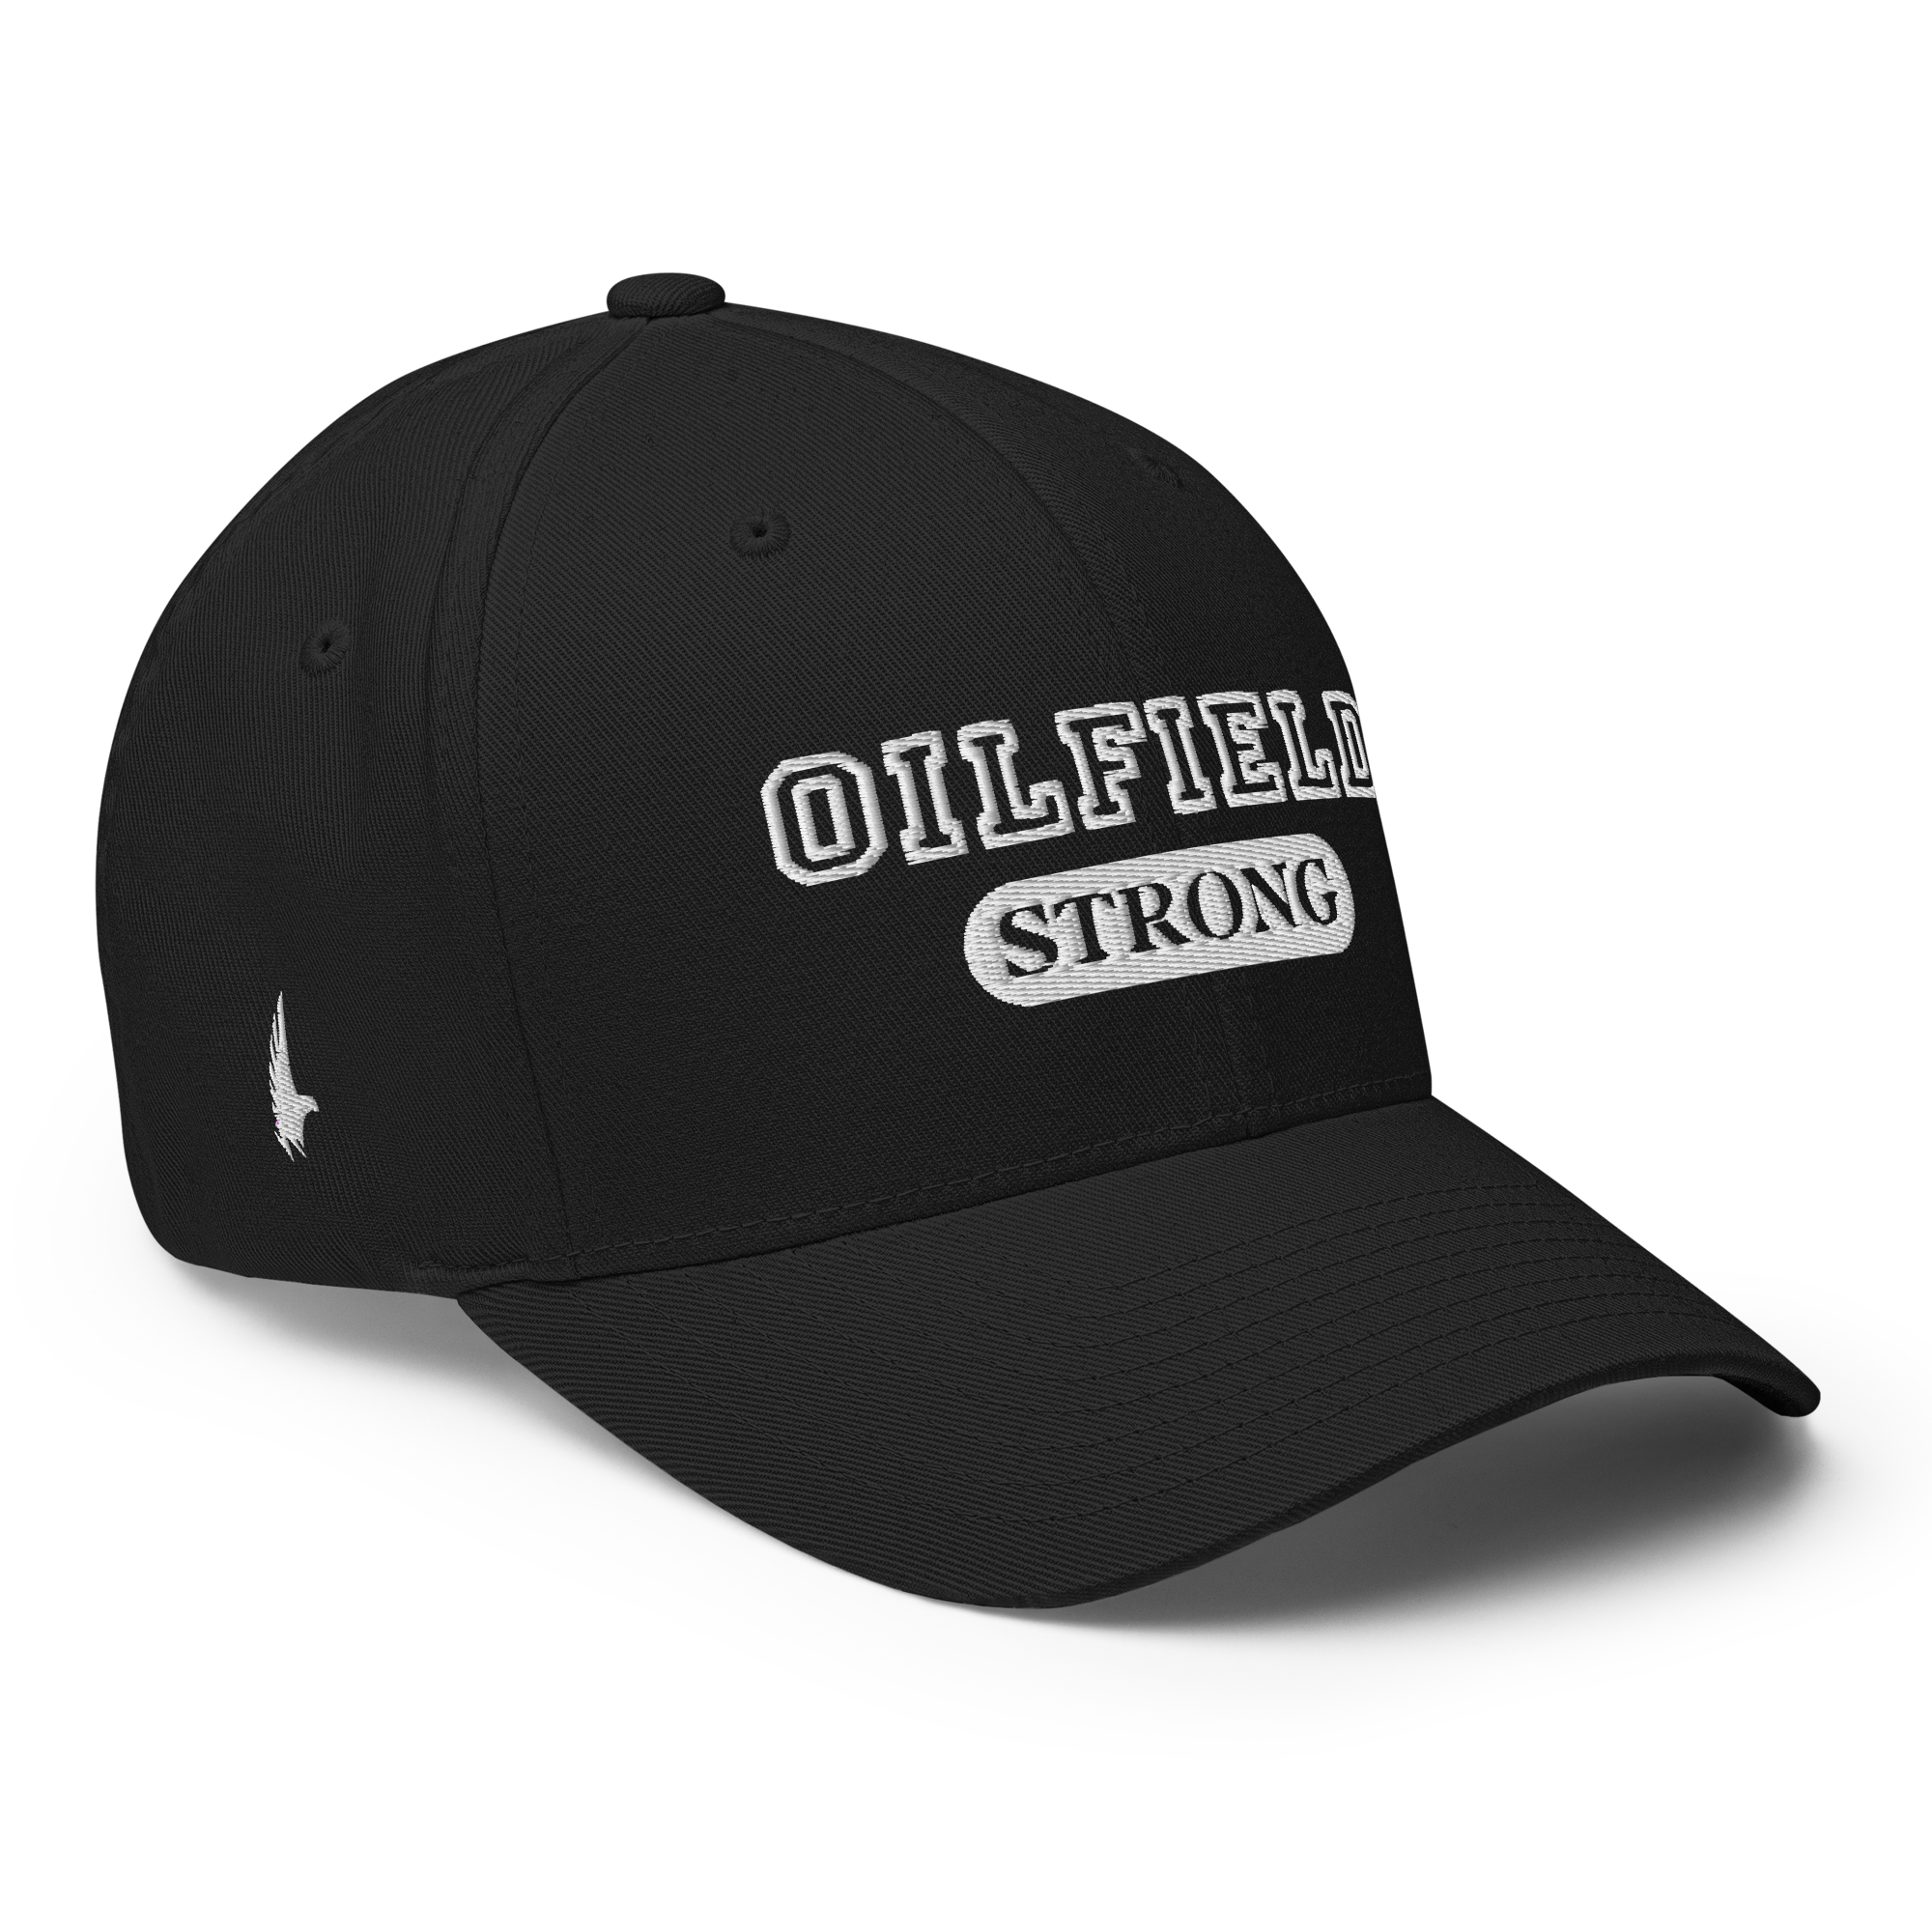 Oilfield Strong Fitted Hat Black - Loyalty Vibes